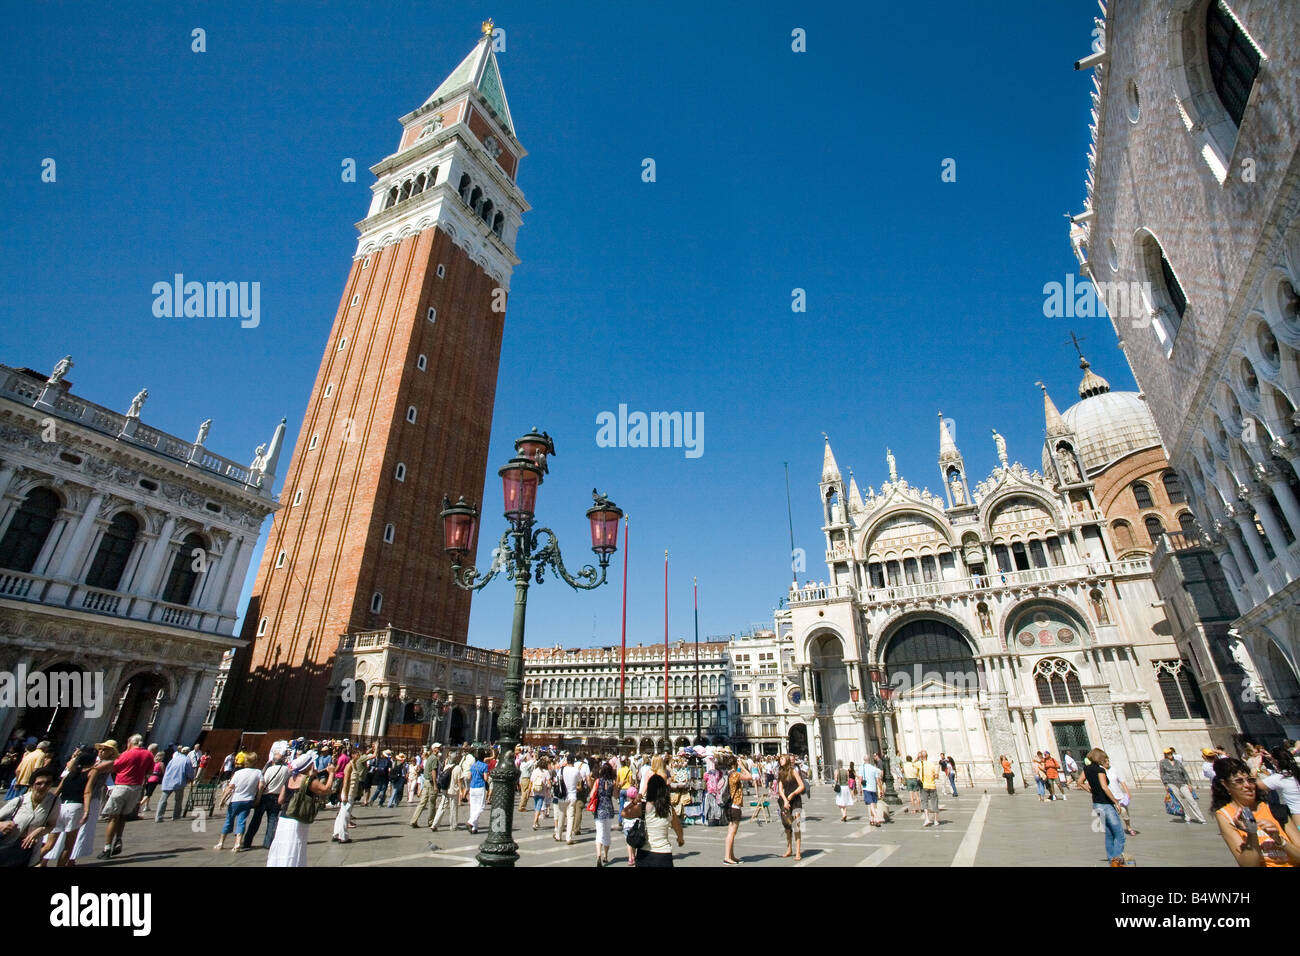 St Marks Piazza in Venice Stock Photo